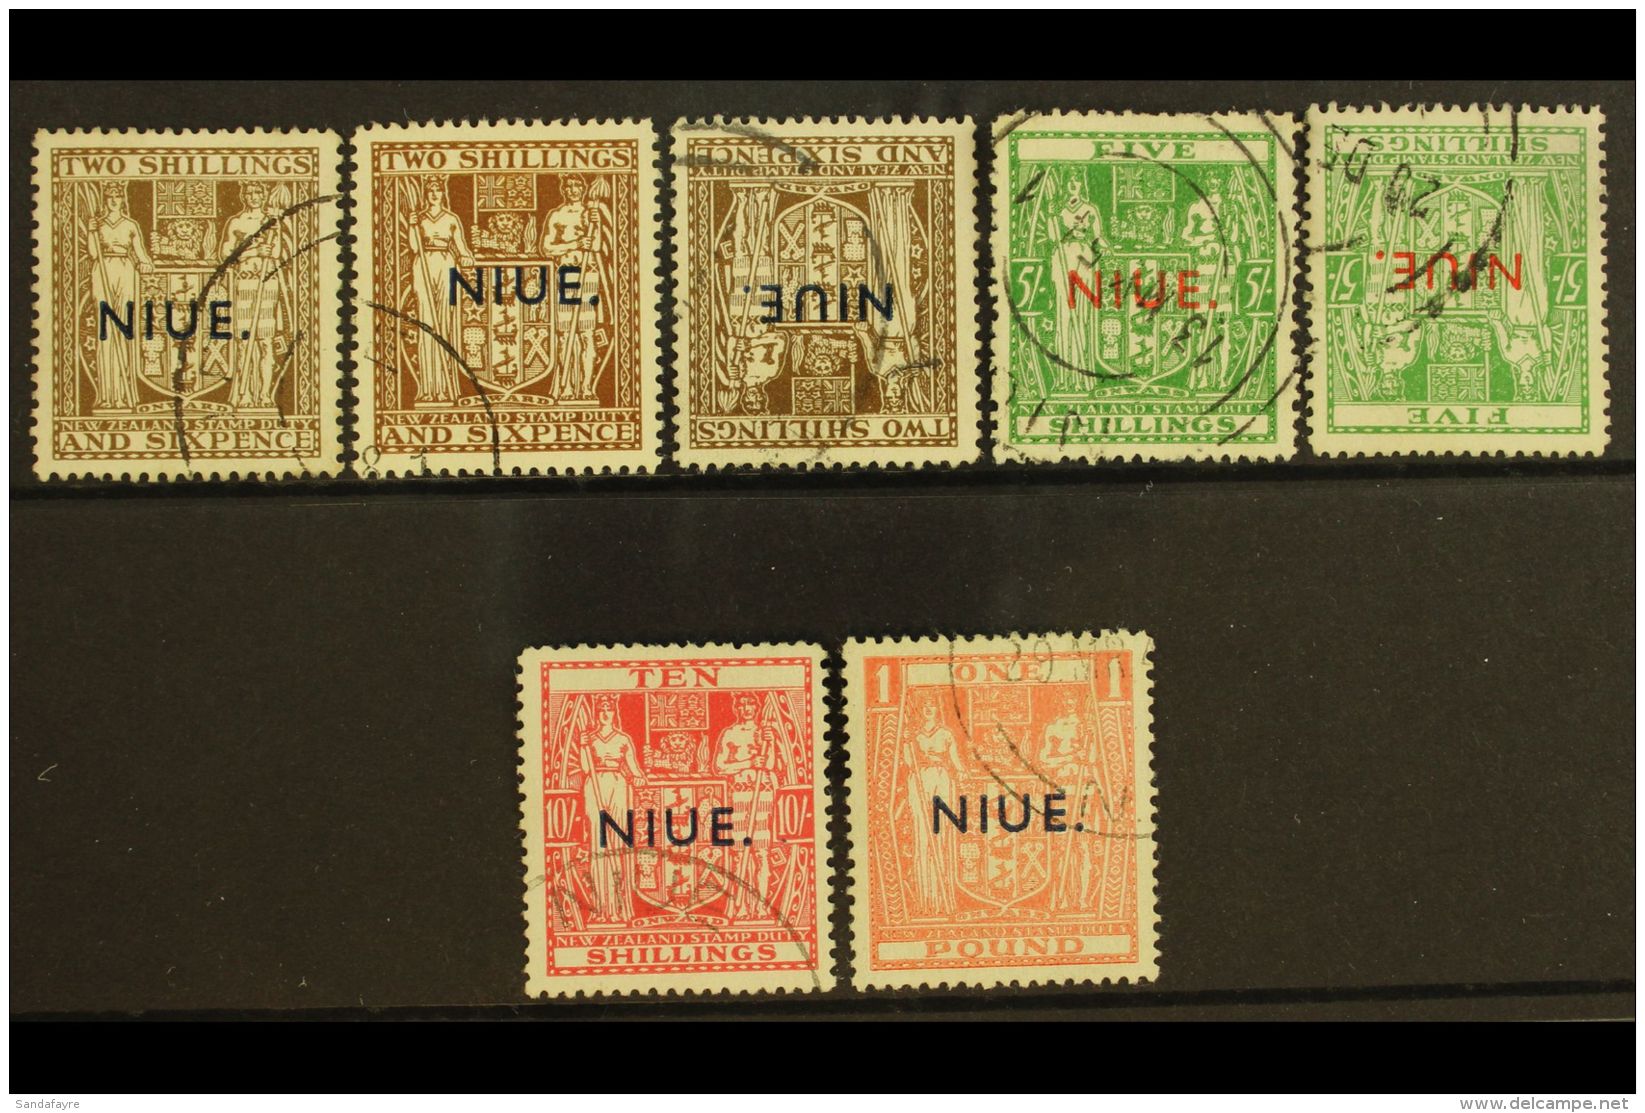 1941-67 Postal Fiscal Stamps Ovptd With SG Type 17 "NIUE," Watermark SG Type W98, Thin "Wiggins Teape" Paper,... - Niue